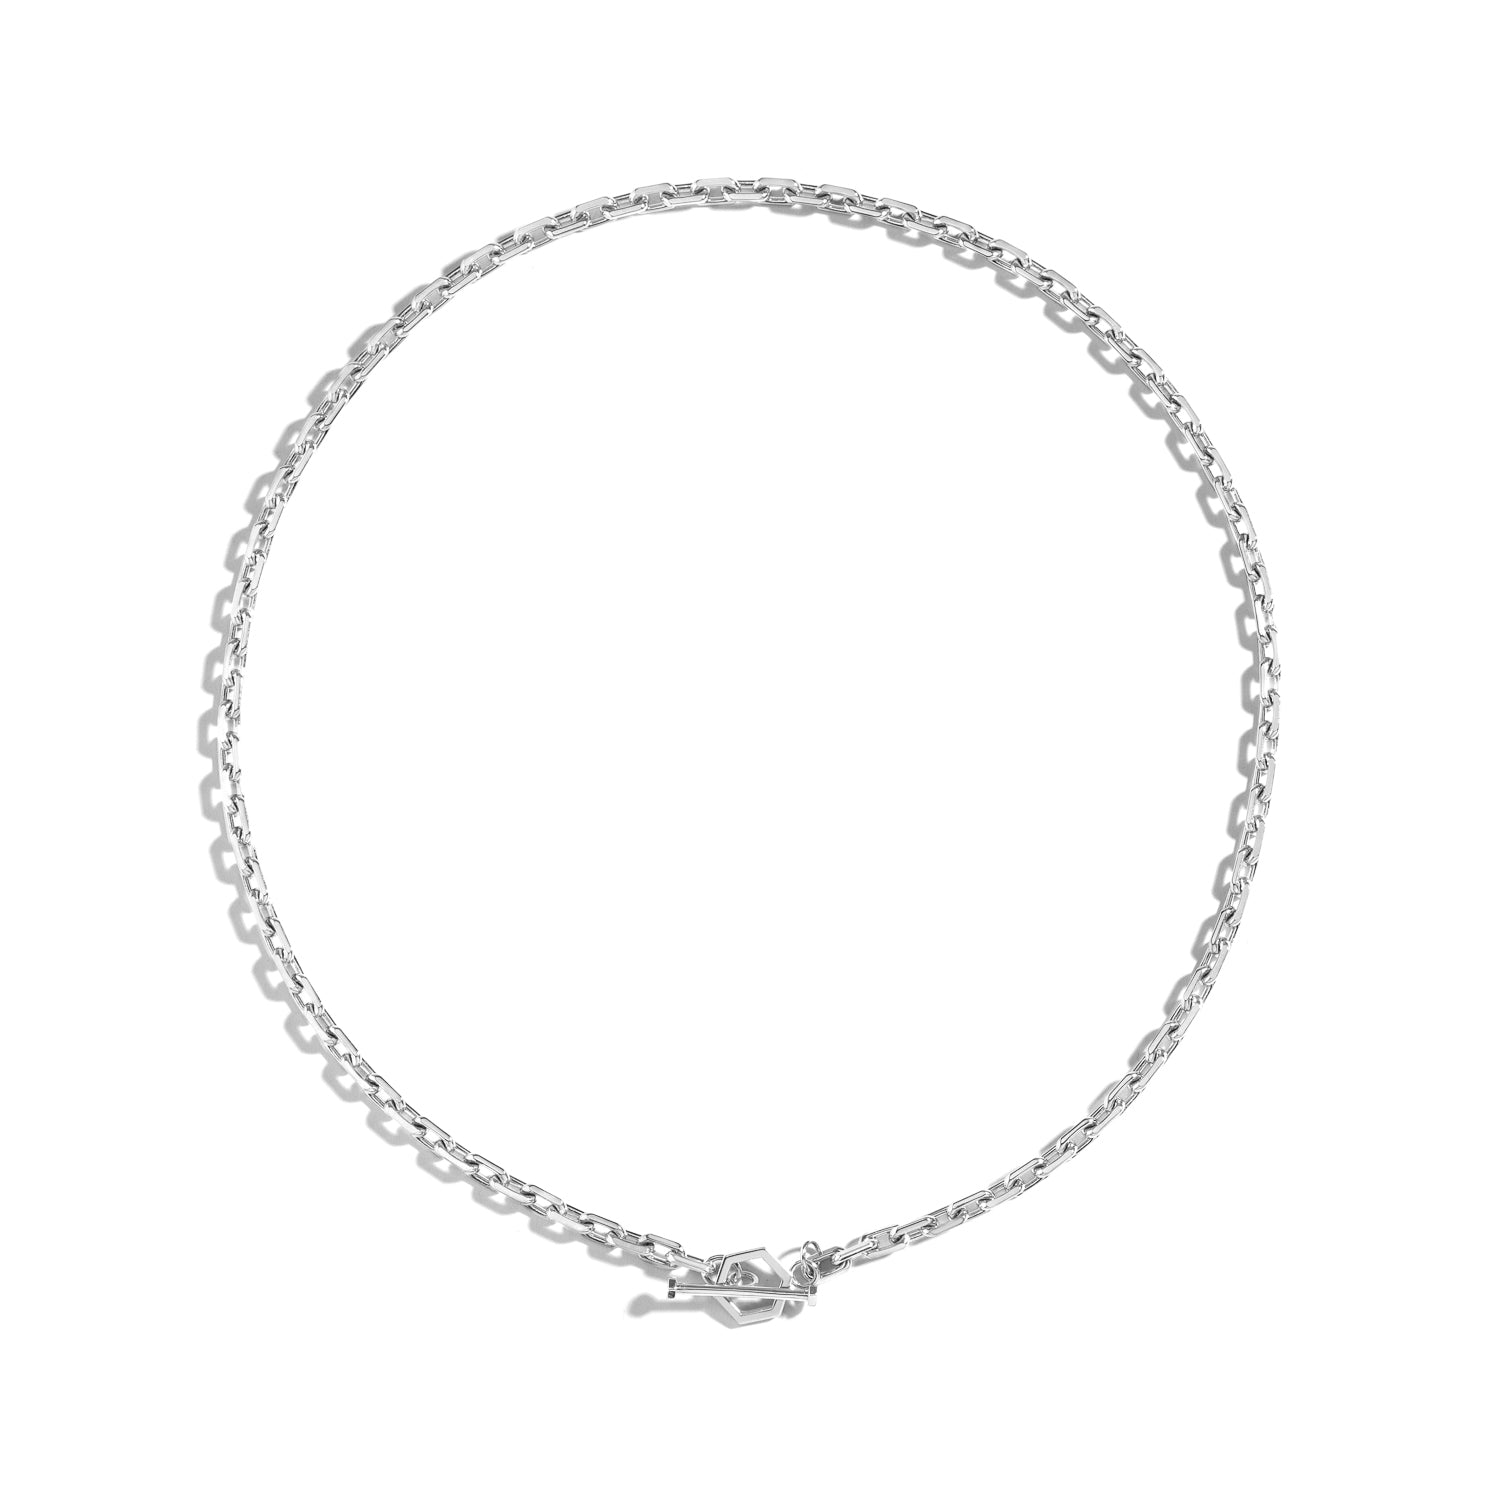 Shahla Karimi 4mm Toggle Chain 16" in White Gold.